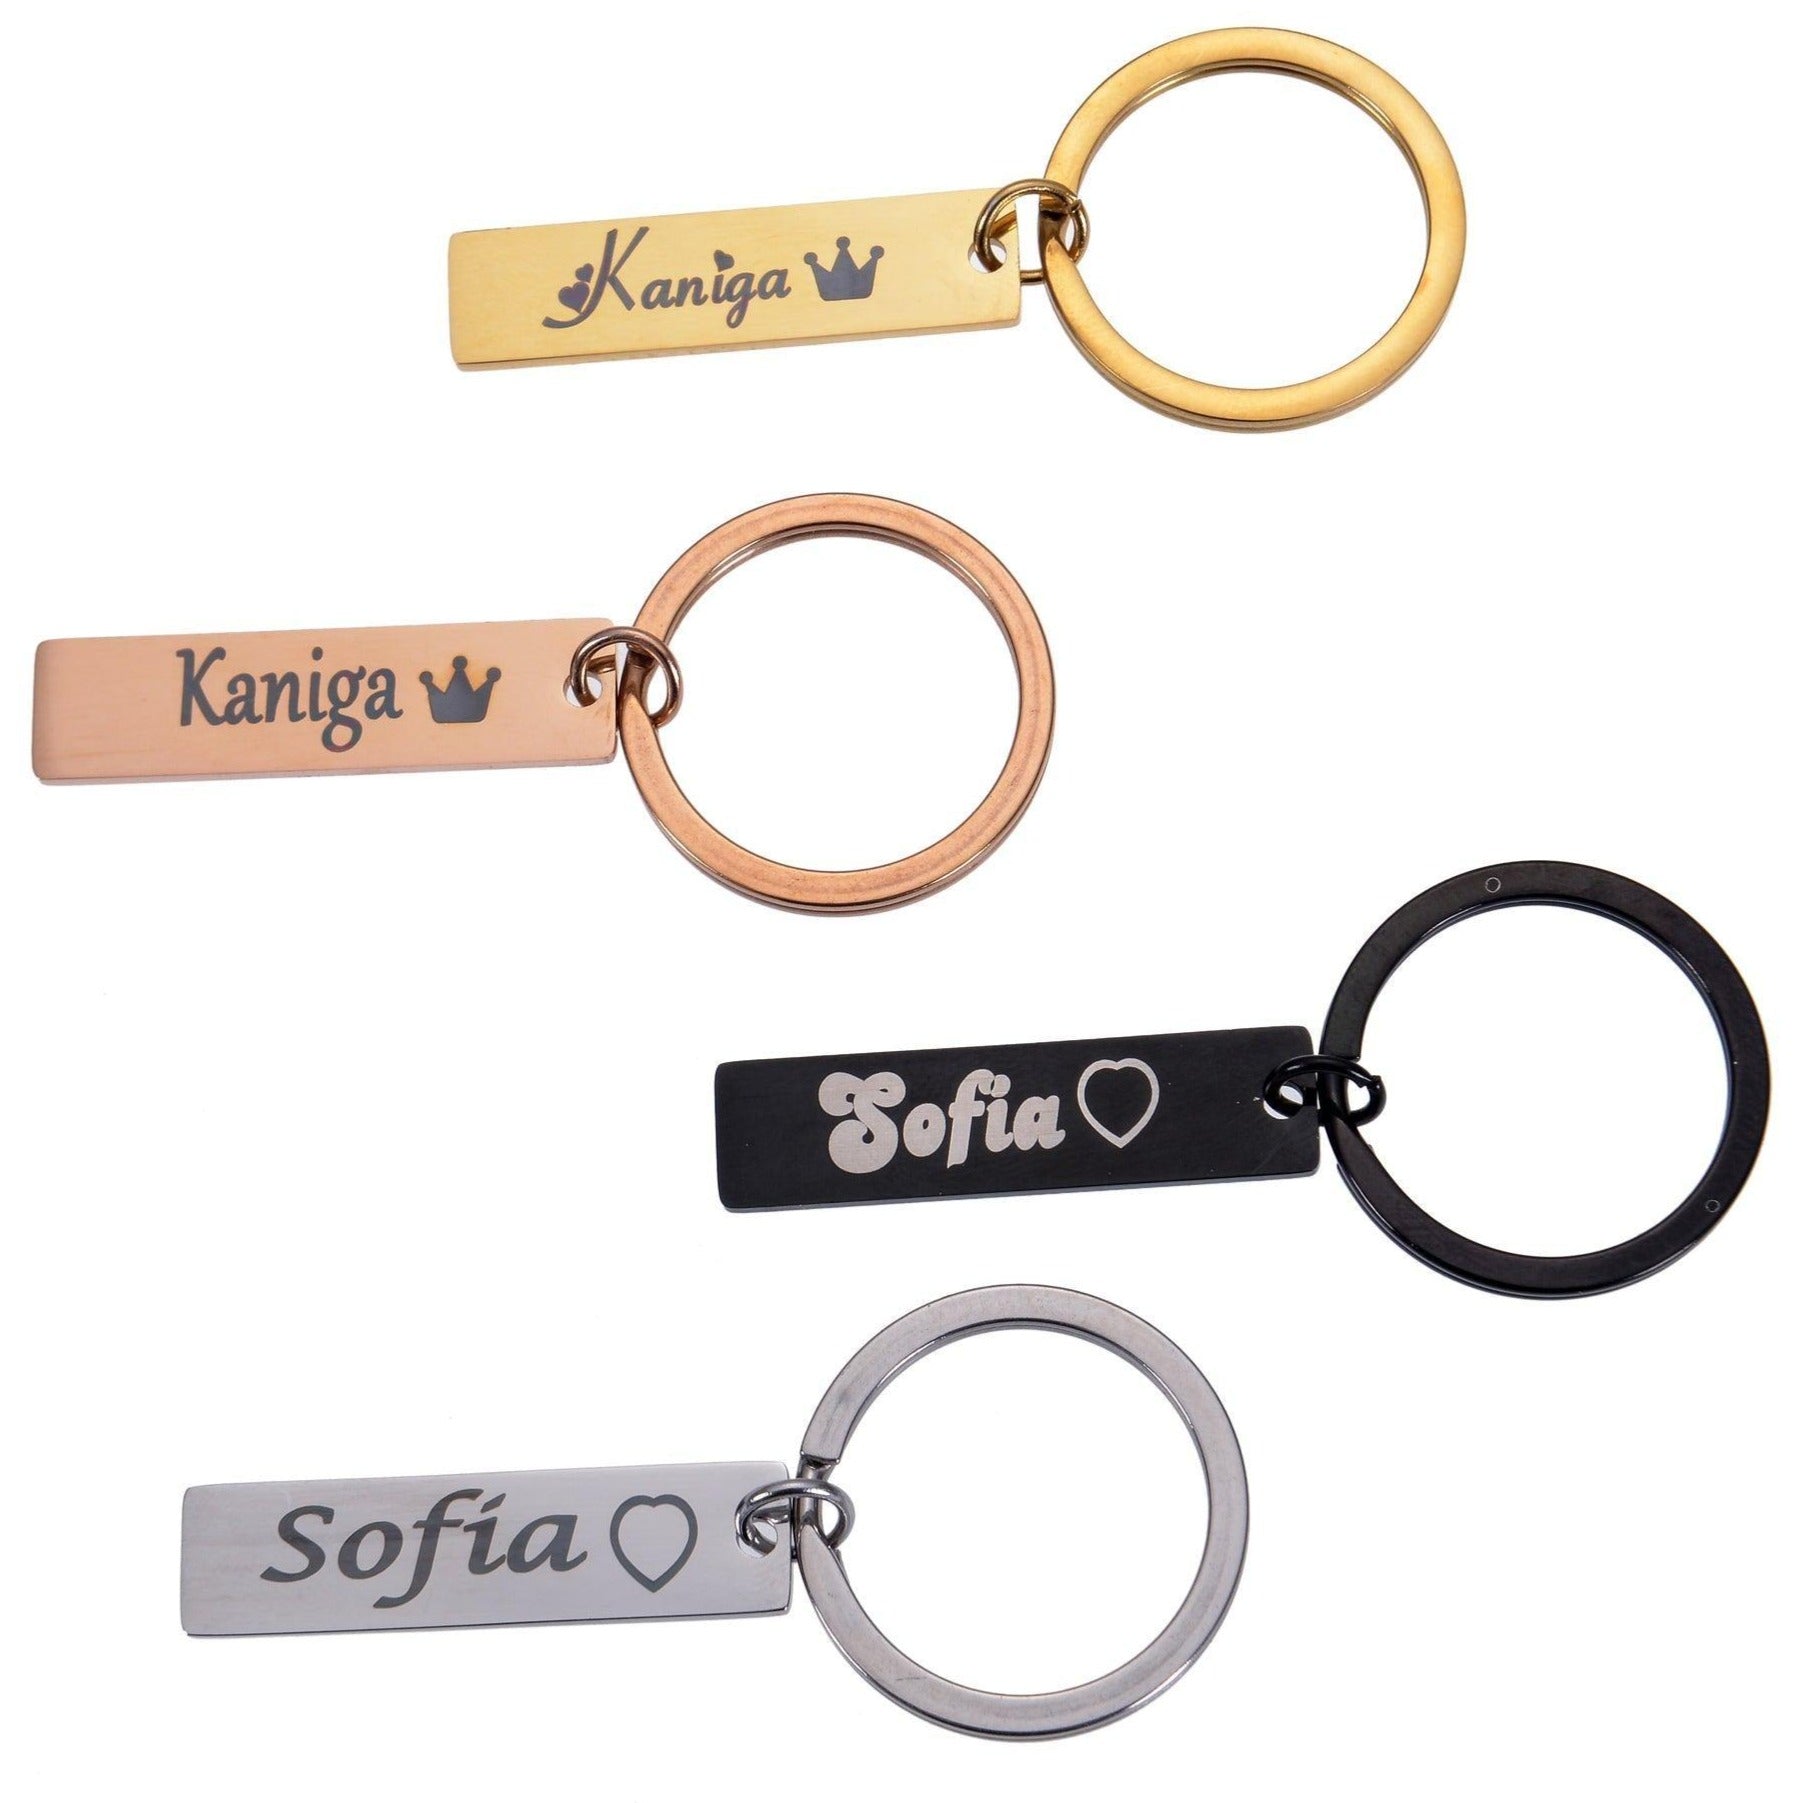 bar name keychain in multiple fonts